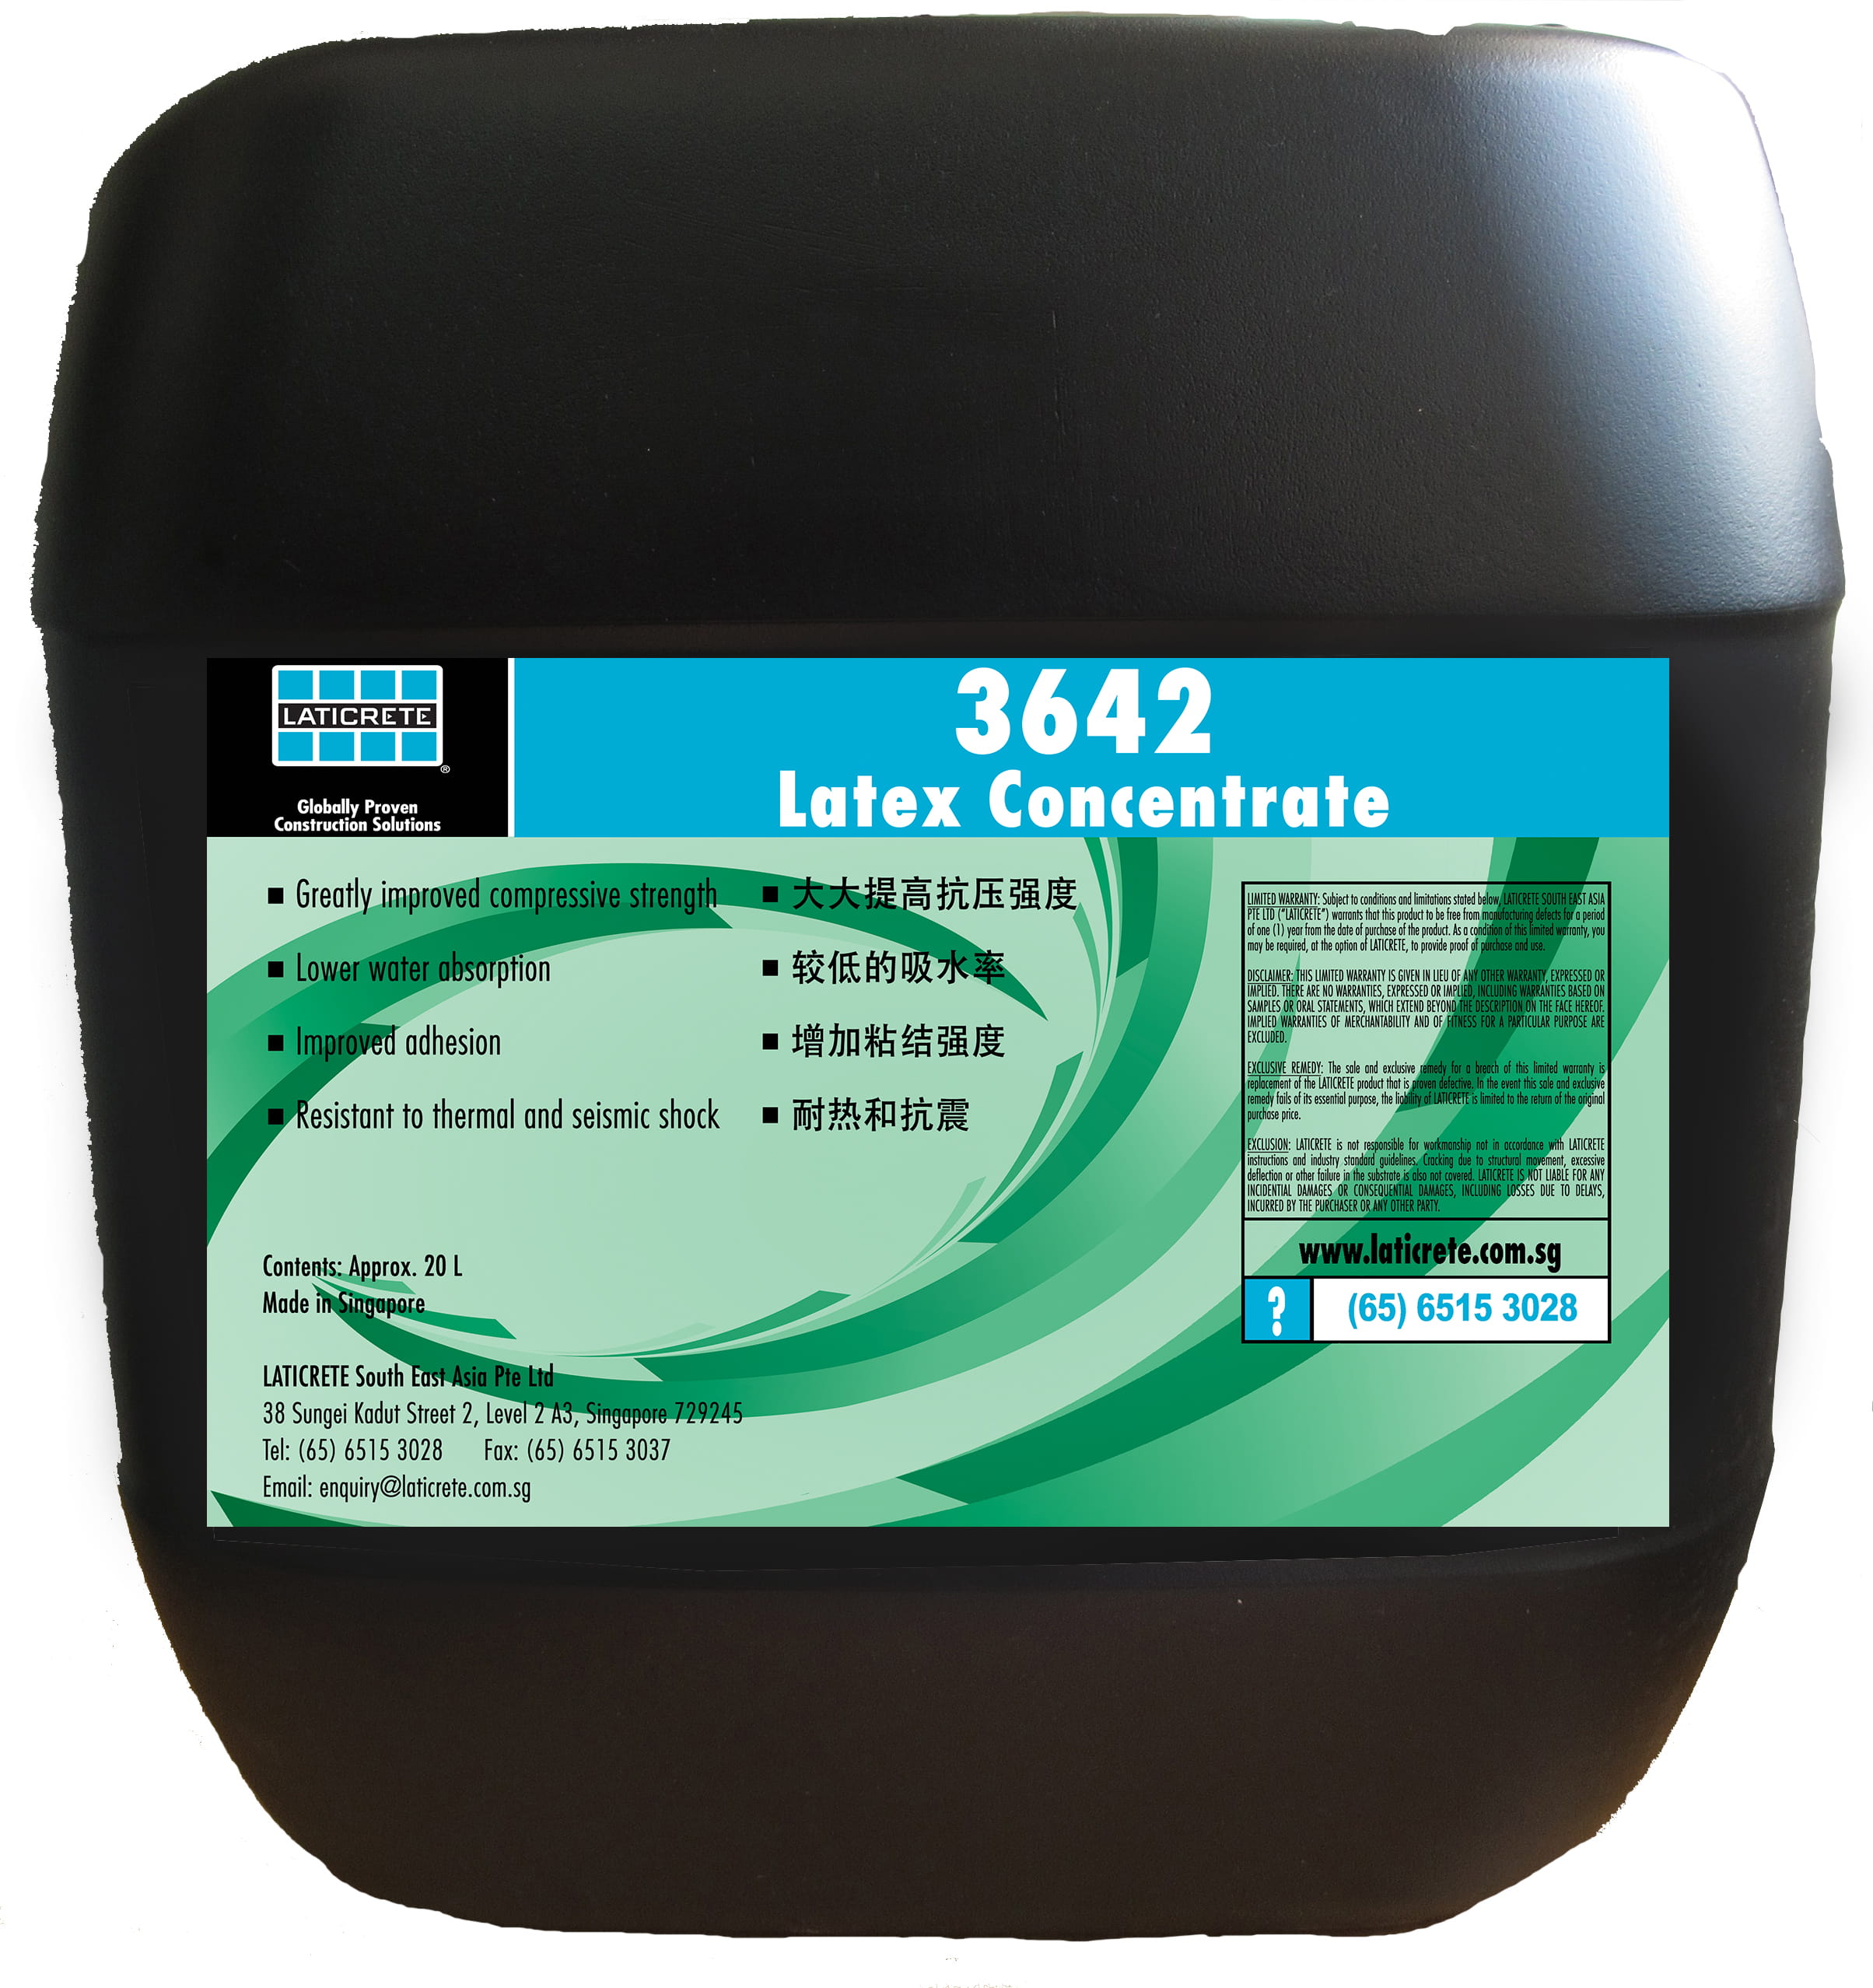 3642 Latex Concentrate